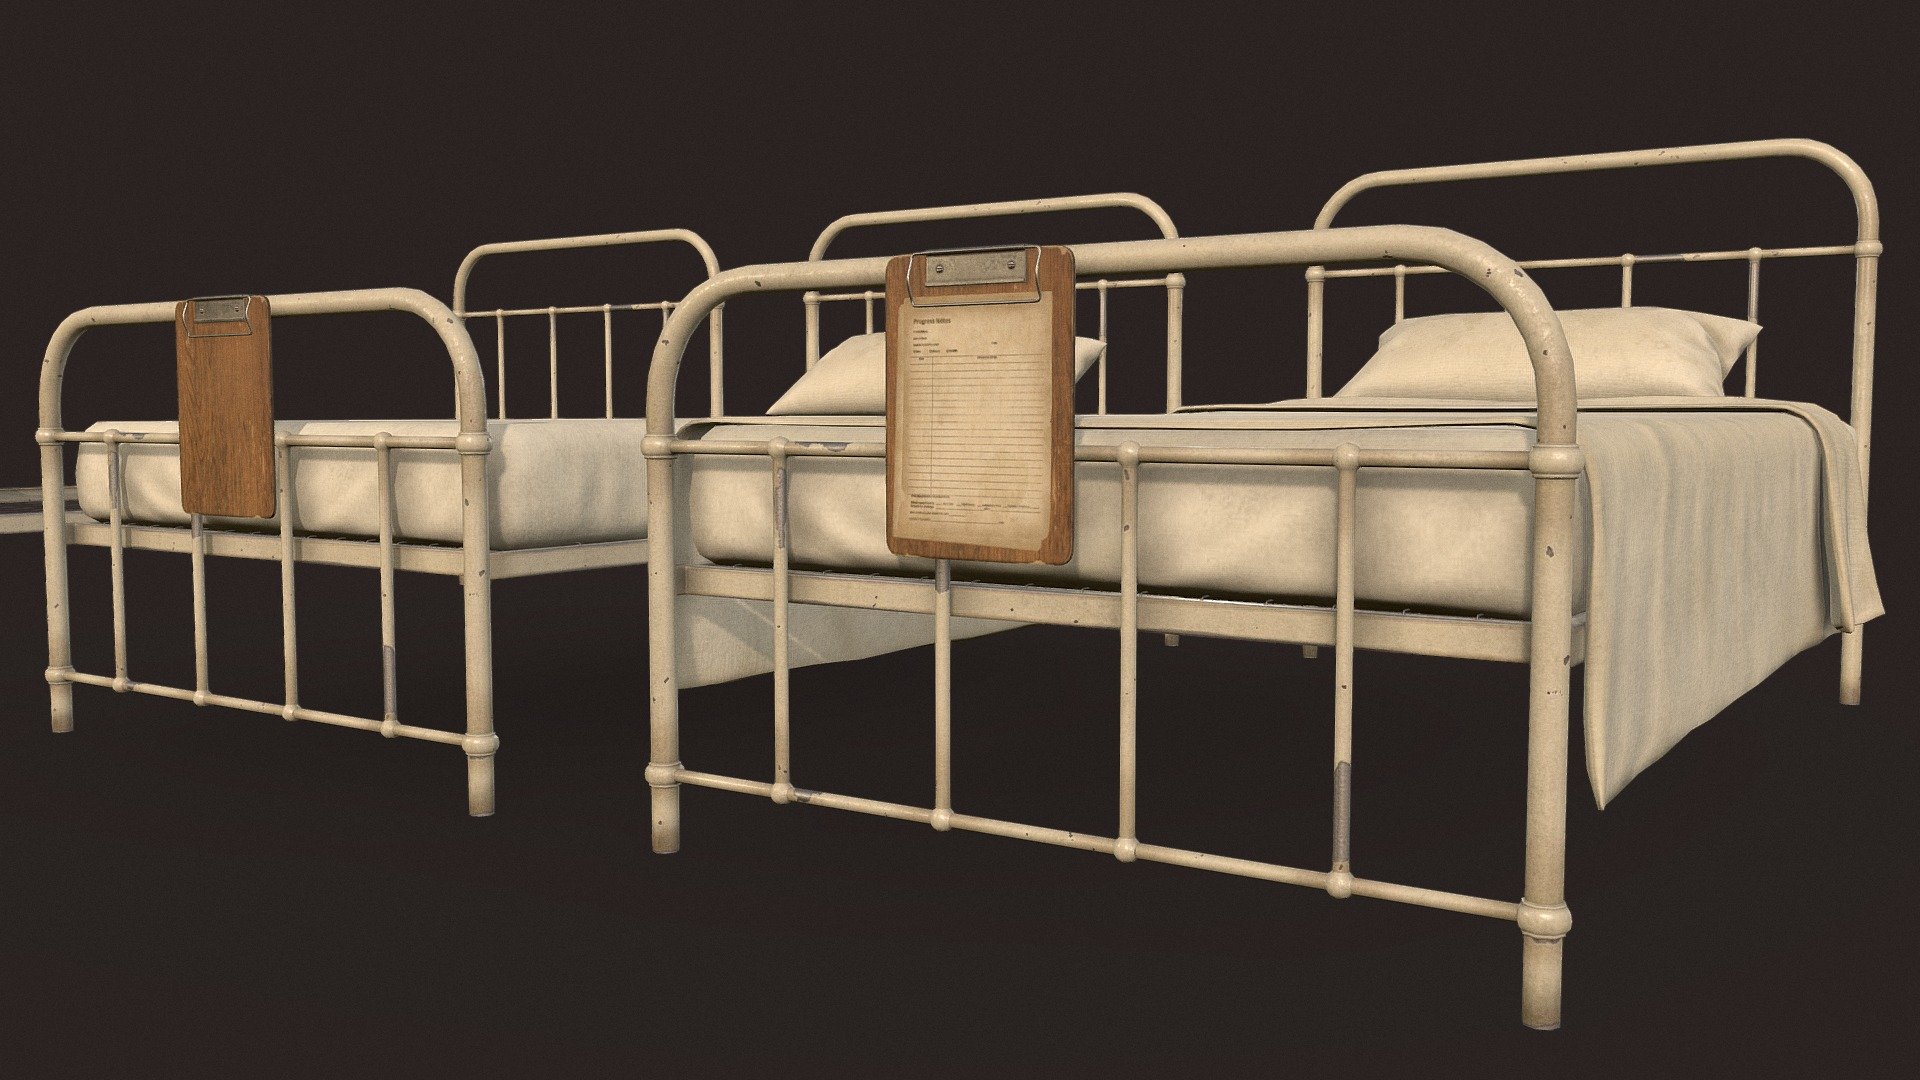 Hospital Bed it's a lowpoly game ready model with unwrapped UVs and PBR textures. 

UVs: channel 1: overlapping; channel 2: non-overlapping (for baking lightmaps).

Formats: FBX, Obj. Marmoset Toolbag scene 3.08 (.tbscene) Textures format: TGA. Textures resolution: 2048x2048px.

Textures set includes:


Metal_Roughness: BaseColor, Roughness, Metallic, Normal, Height, AO.
Unity 5 (Standart Metallic): AlbedoTransparency, AO, Normal, MetallicSmoothness.
Unreal Engine 4: BaseColor, OcclusionRoughnessMetallic, Normal.


Artstation: https://www.artstation.com/tatianagladkaya

Instagram: https://www.instagram.com/t.gladkaya_ - Hospital Bed - 3D model by Tatiana Gladkaya (@tatiana_gladkaya) 3d model